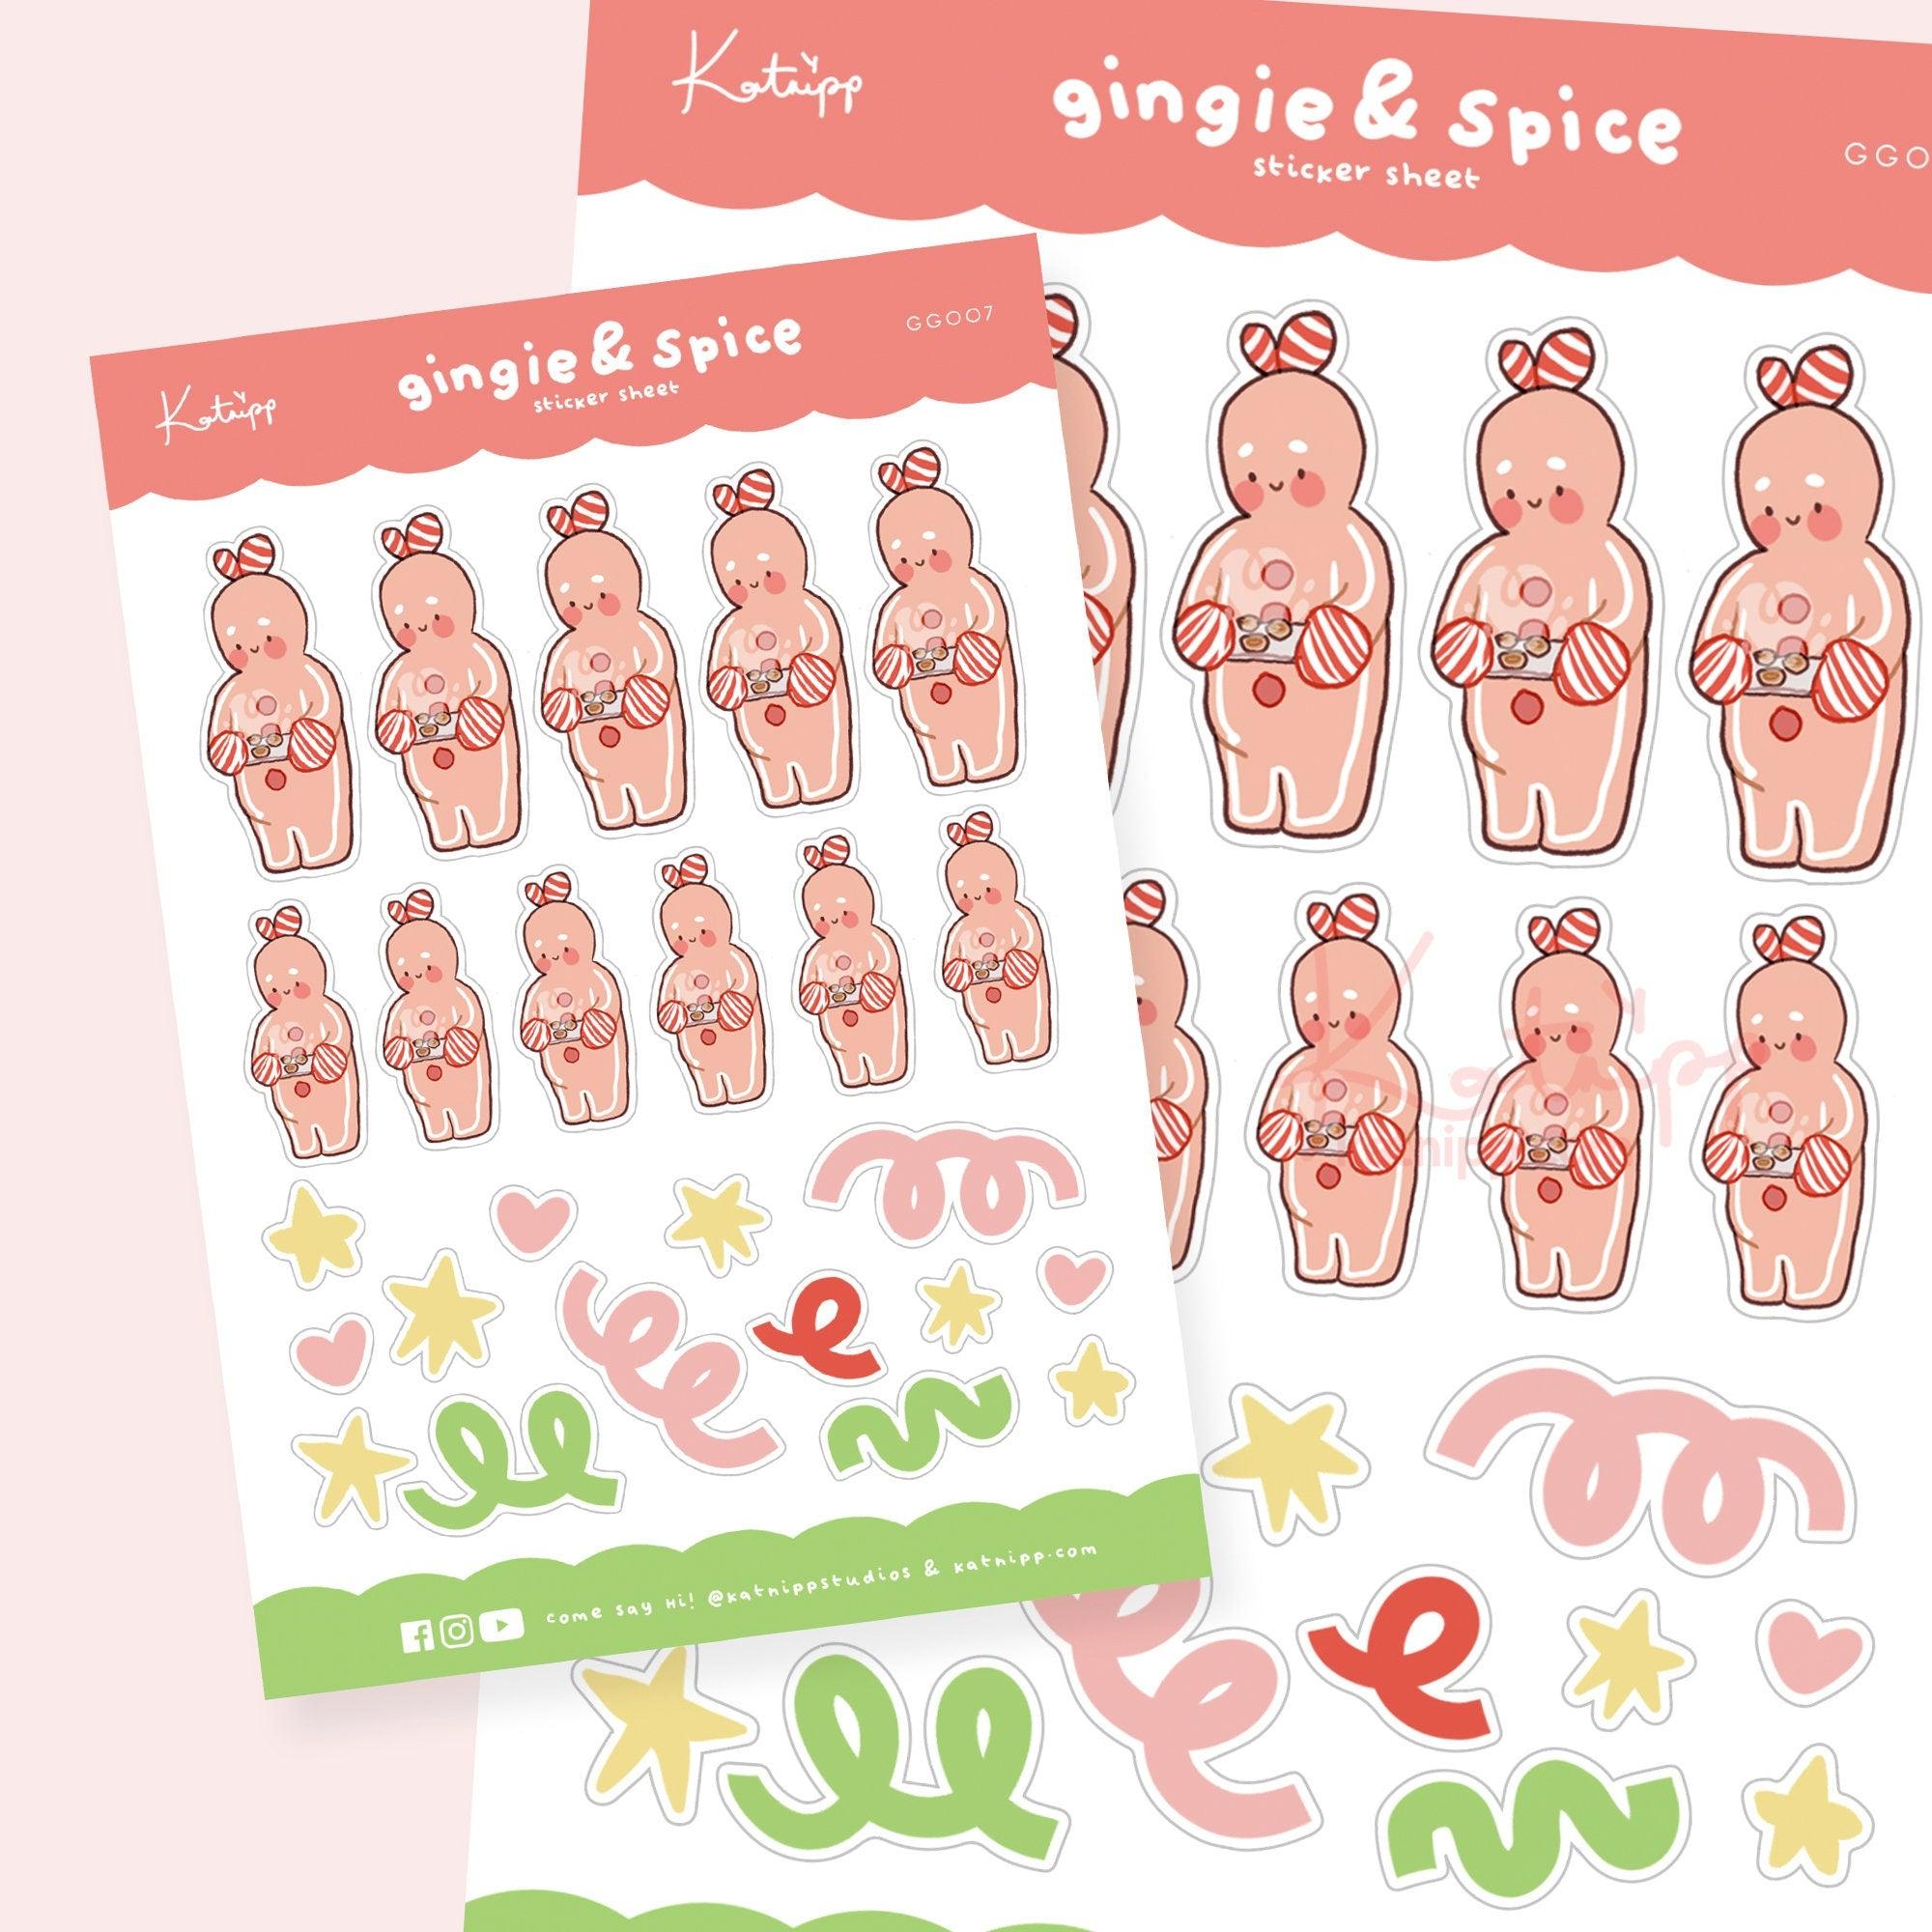 Spice Christmas Cooking Stickers - GG007 - Katnipp Studios